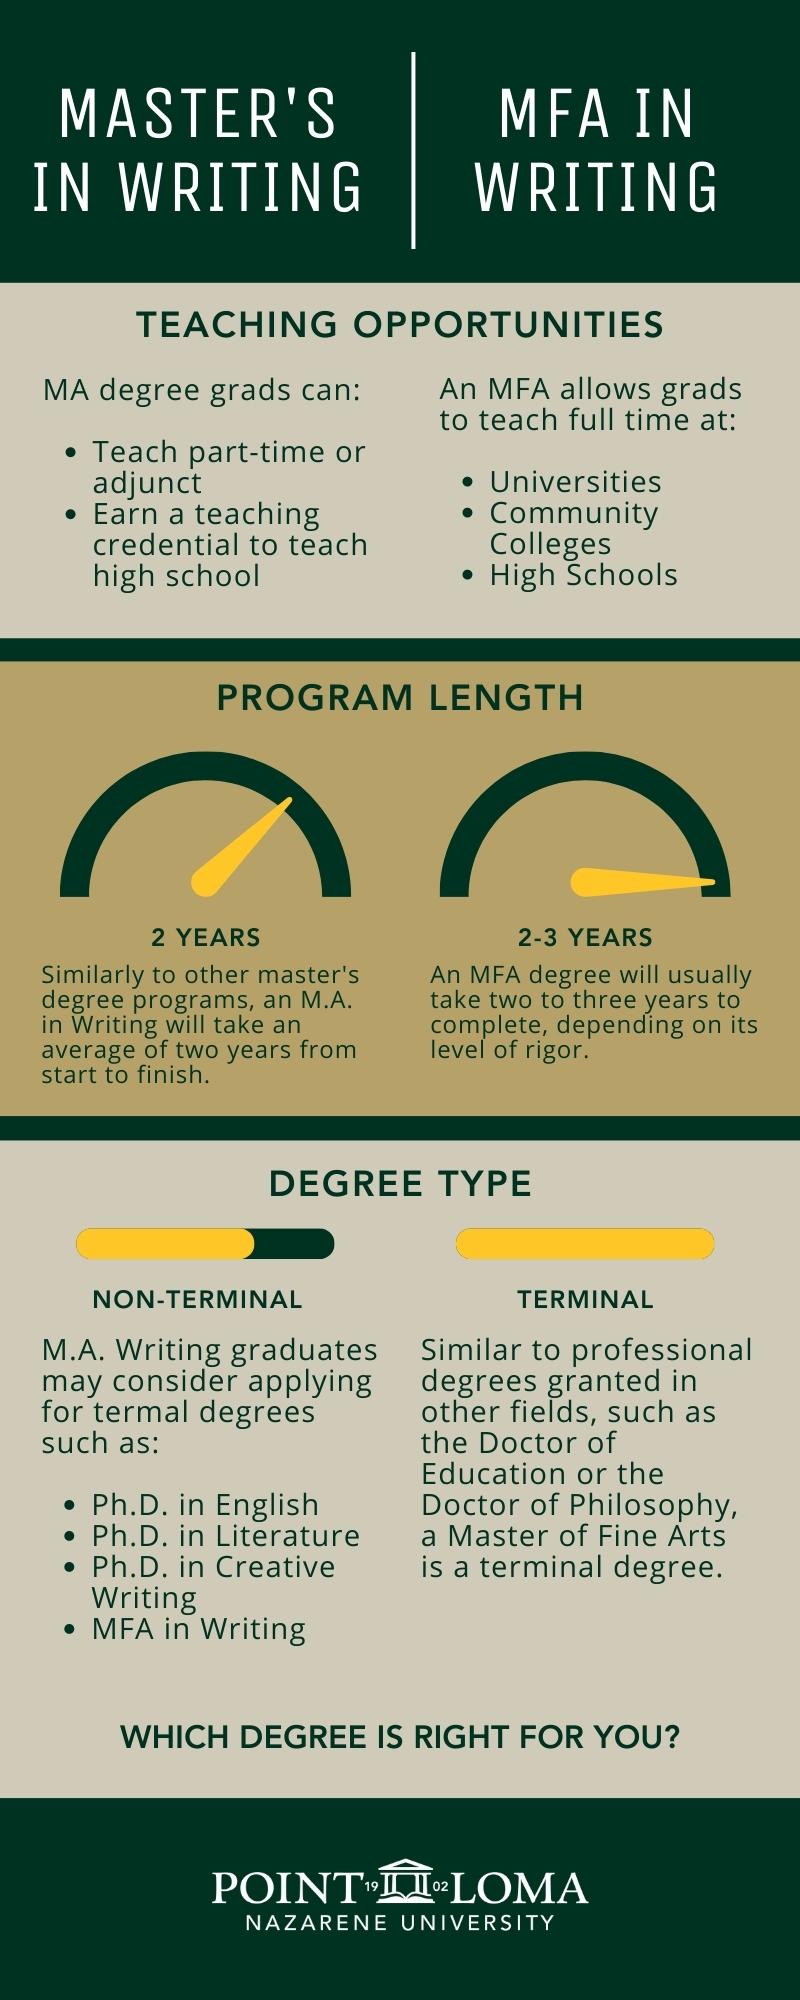 While both an M.A. in Writing and an M.F.A. in Writing are very similar graduate-level degrees, they differ in teaching opportunities, program length and degree type.